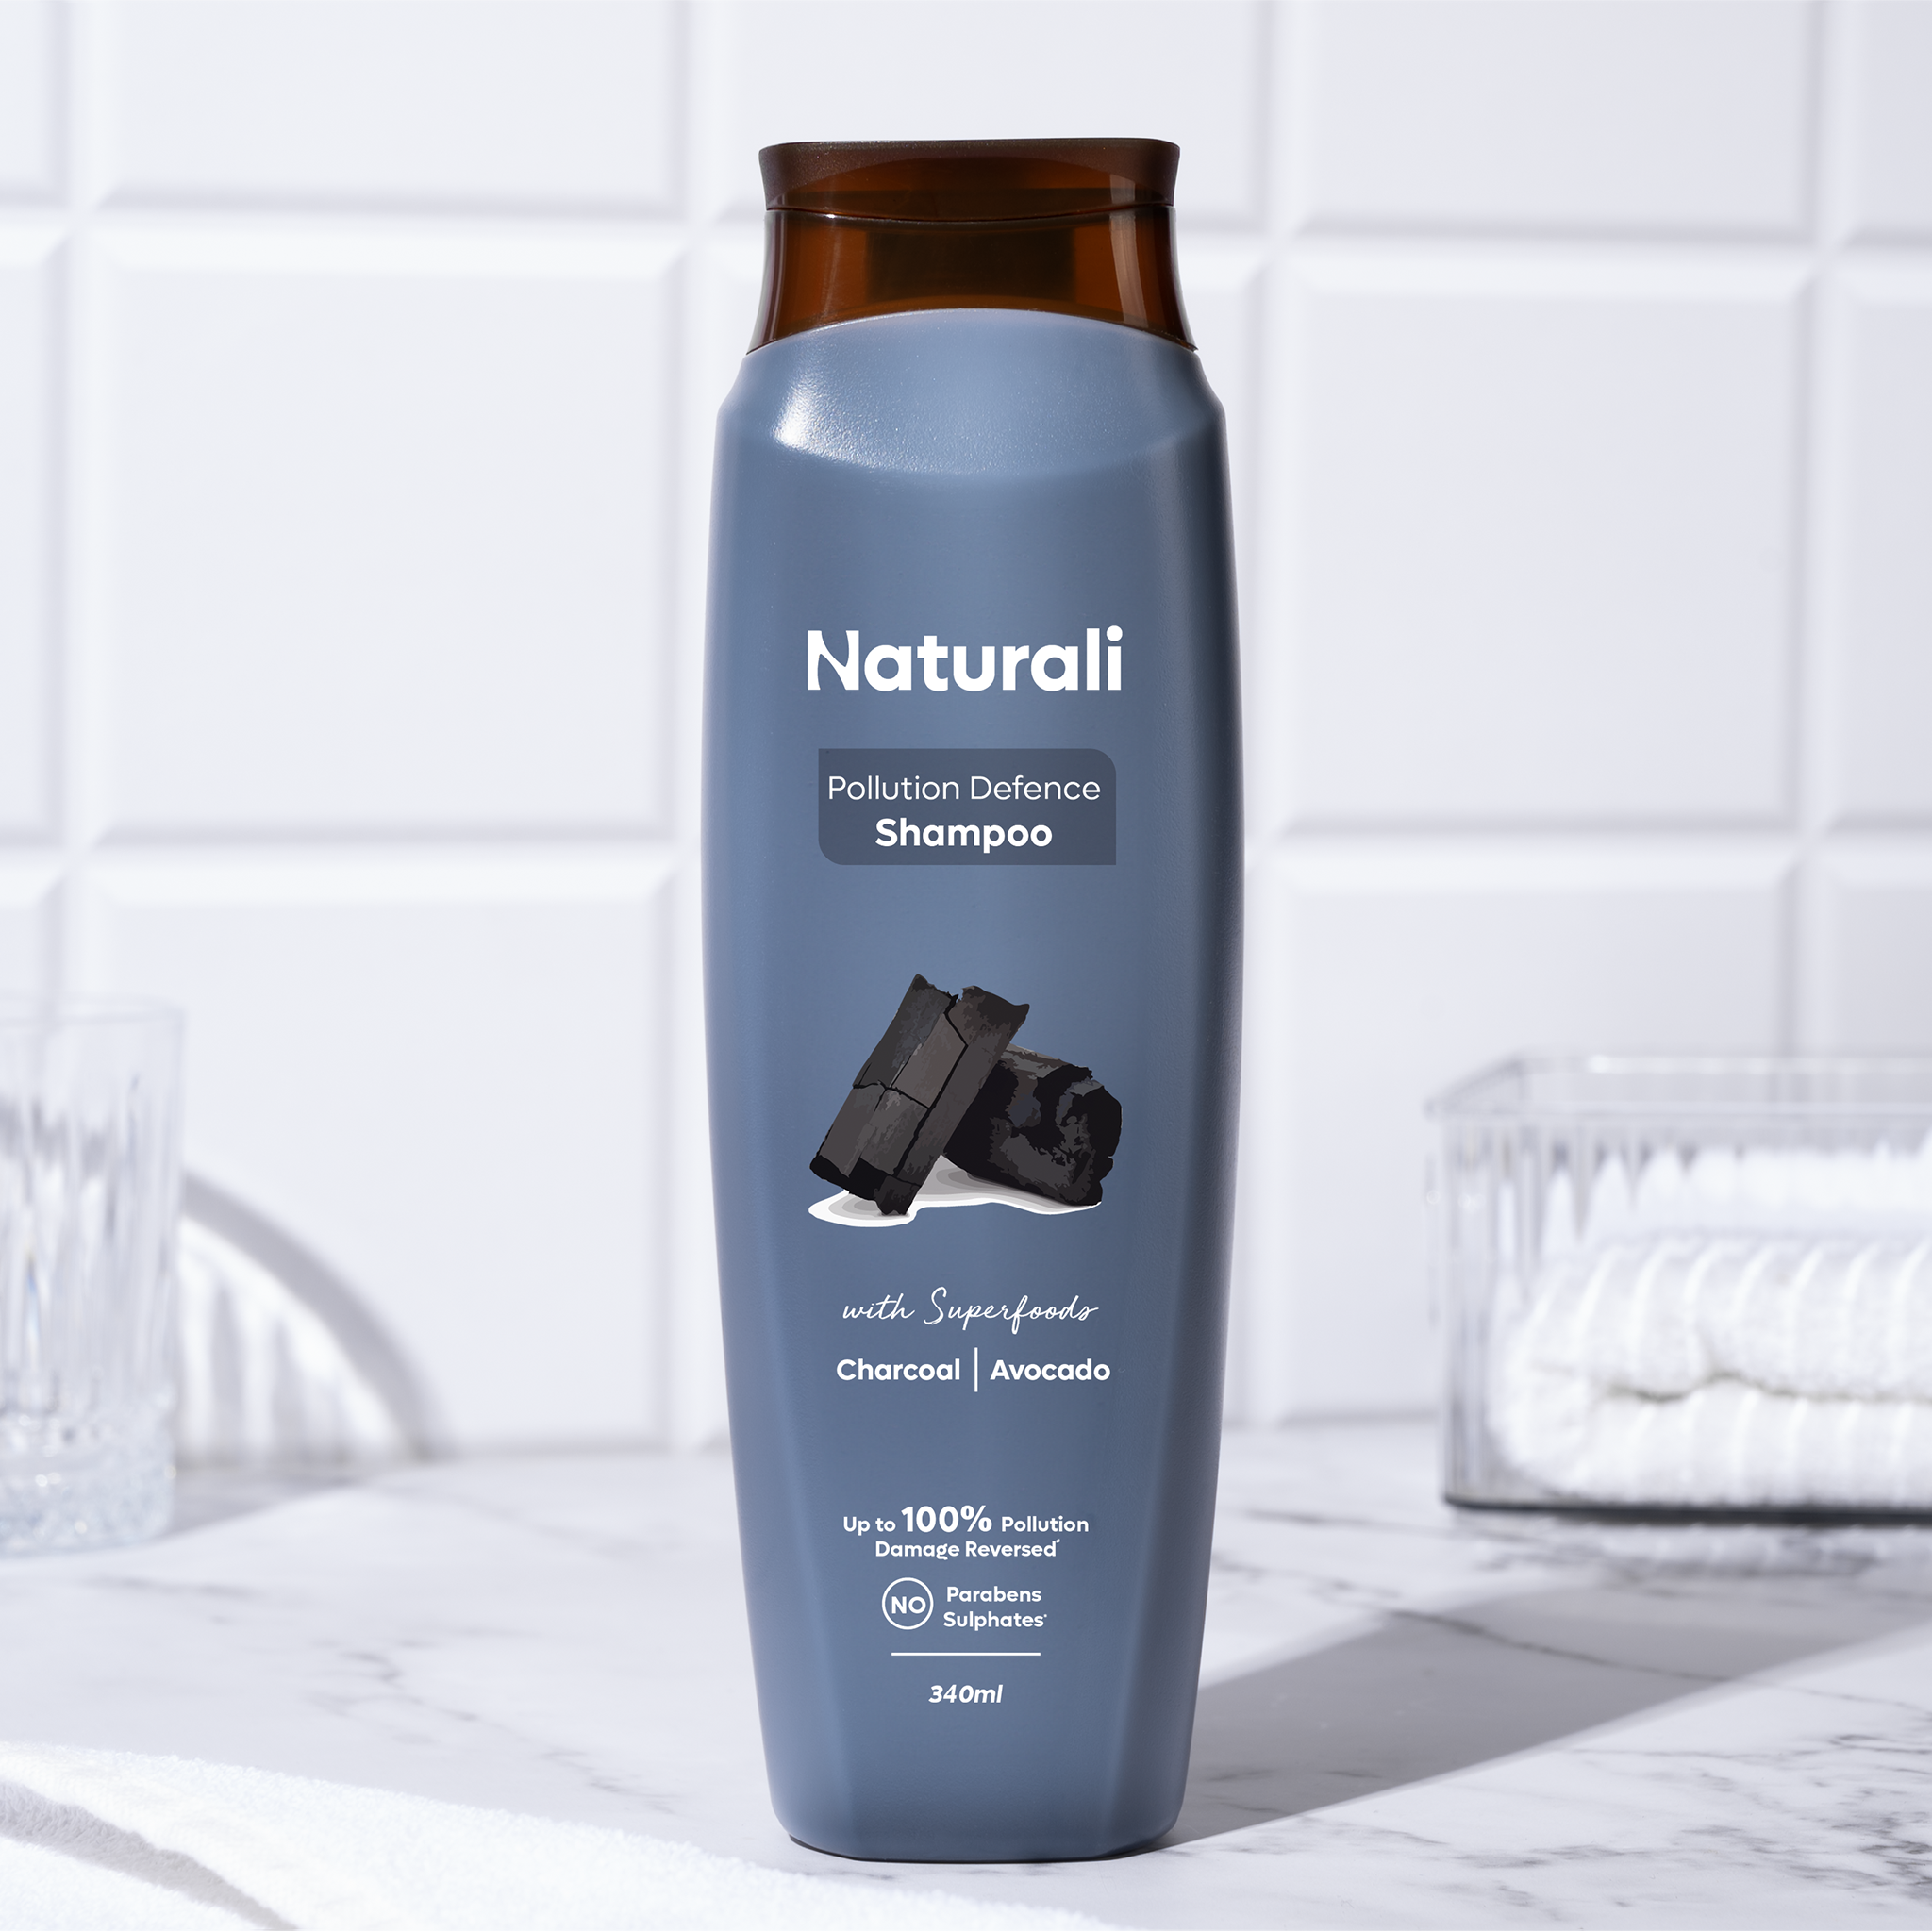 Pollution Defence Detox Shampoo with Charcoal and Avocado